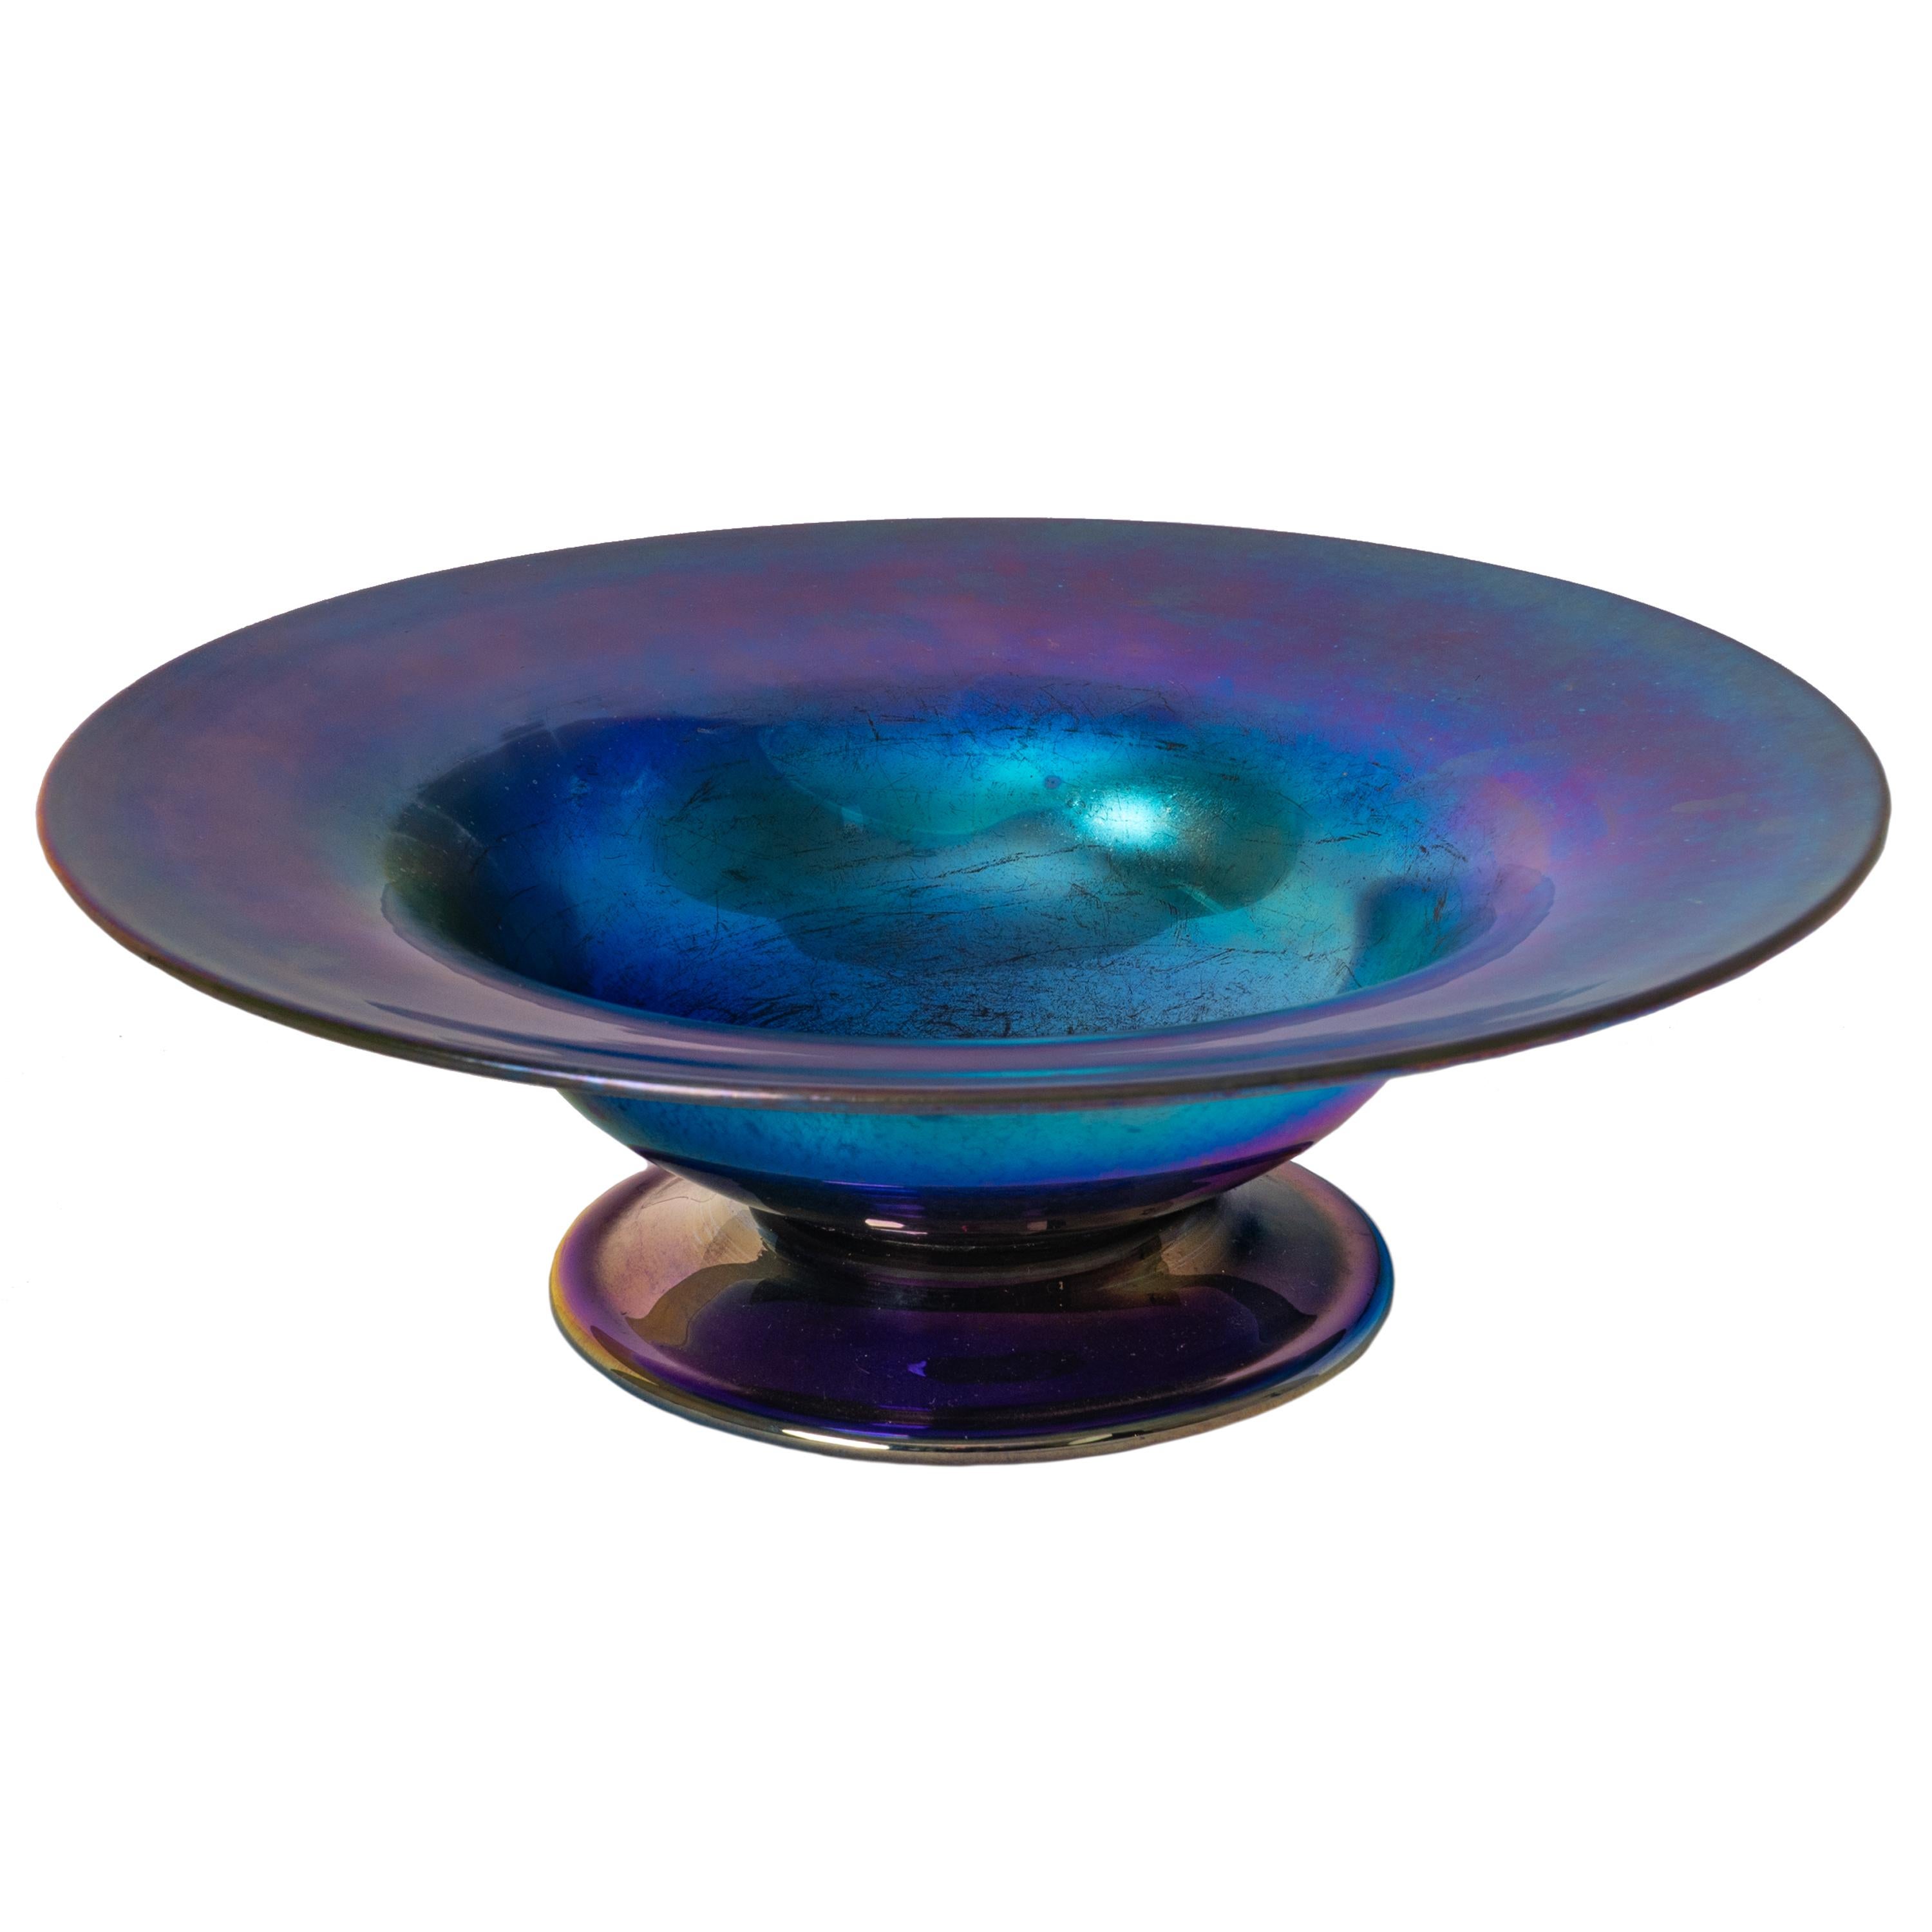 A good antique Art Nouveau L. C. Tiffany blue Favrile footed glass bowl/compote, circa 1910.
Tiffany Favrile compotes are not uncommon in gold and much rarer in blue, especially this intense blue with purple highlights. This beautiful iridescent